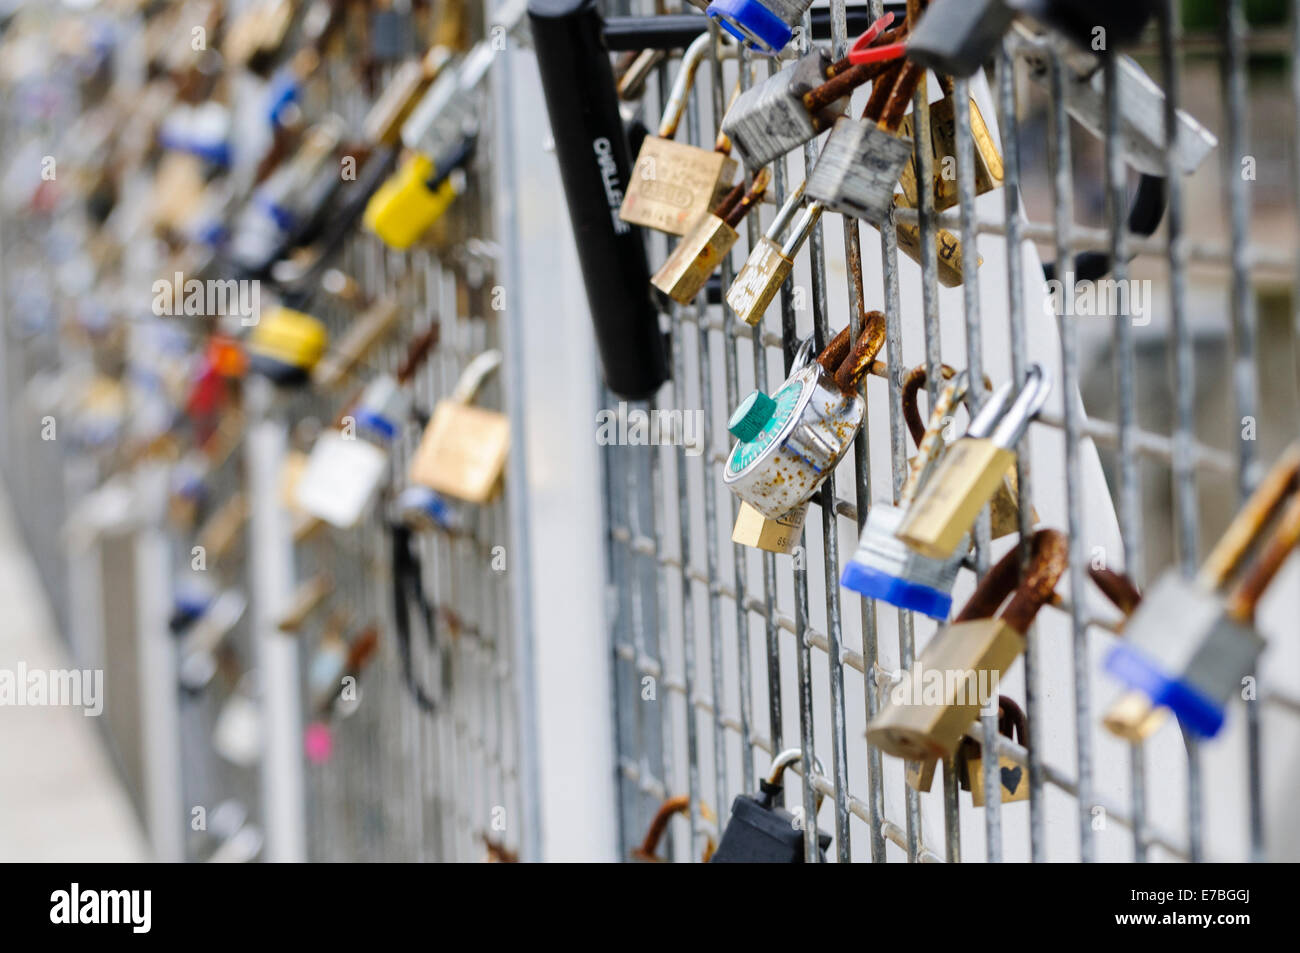 Padlocks on a bridge put there by lovers to show their love. Stock Photo